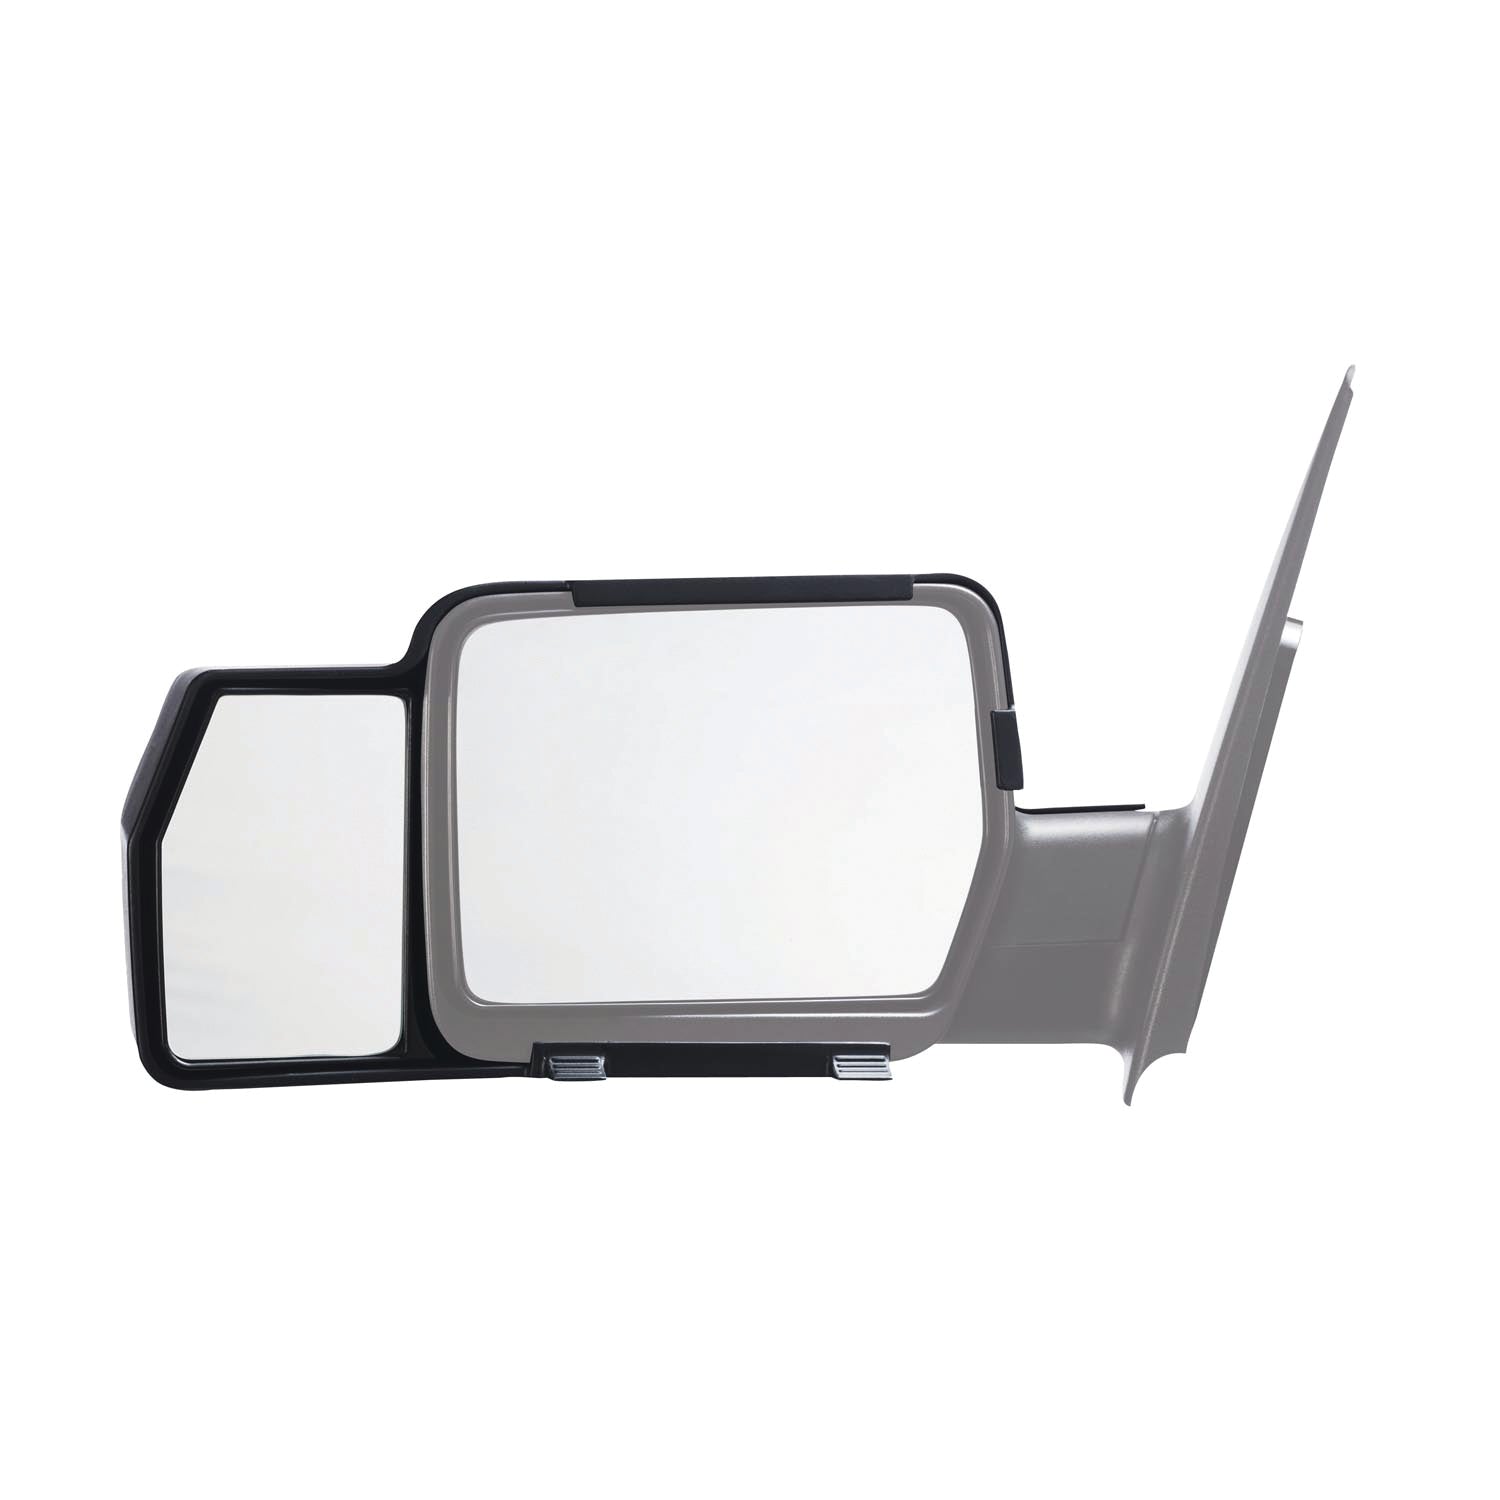 K-Source 81800 Snap-On Towing Mirrors For Ford F-150, Lincoln Navigator (04-08)